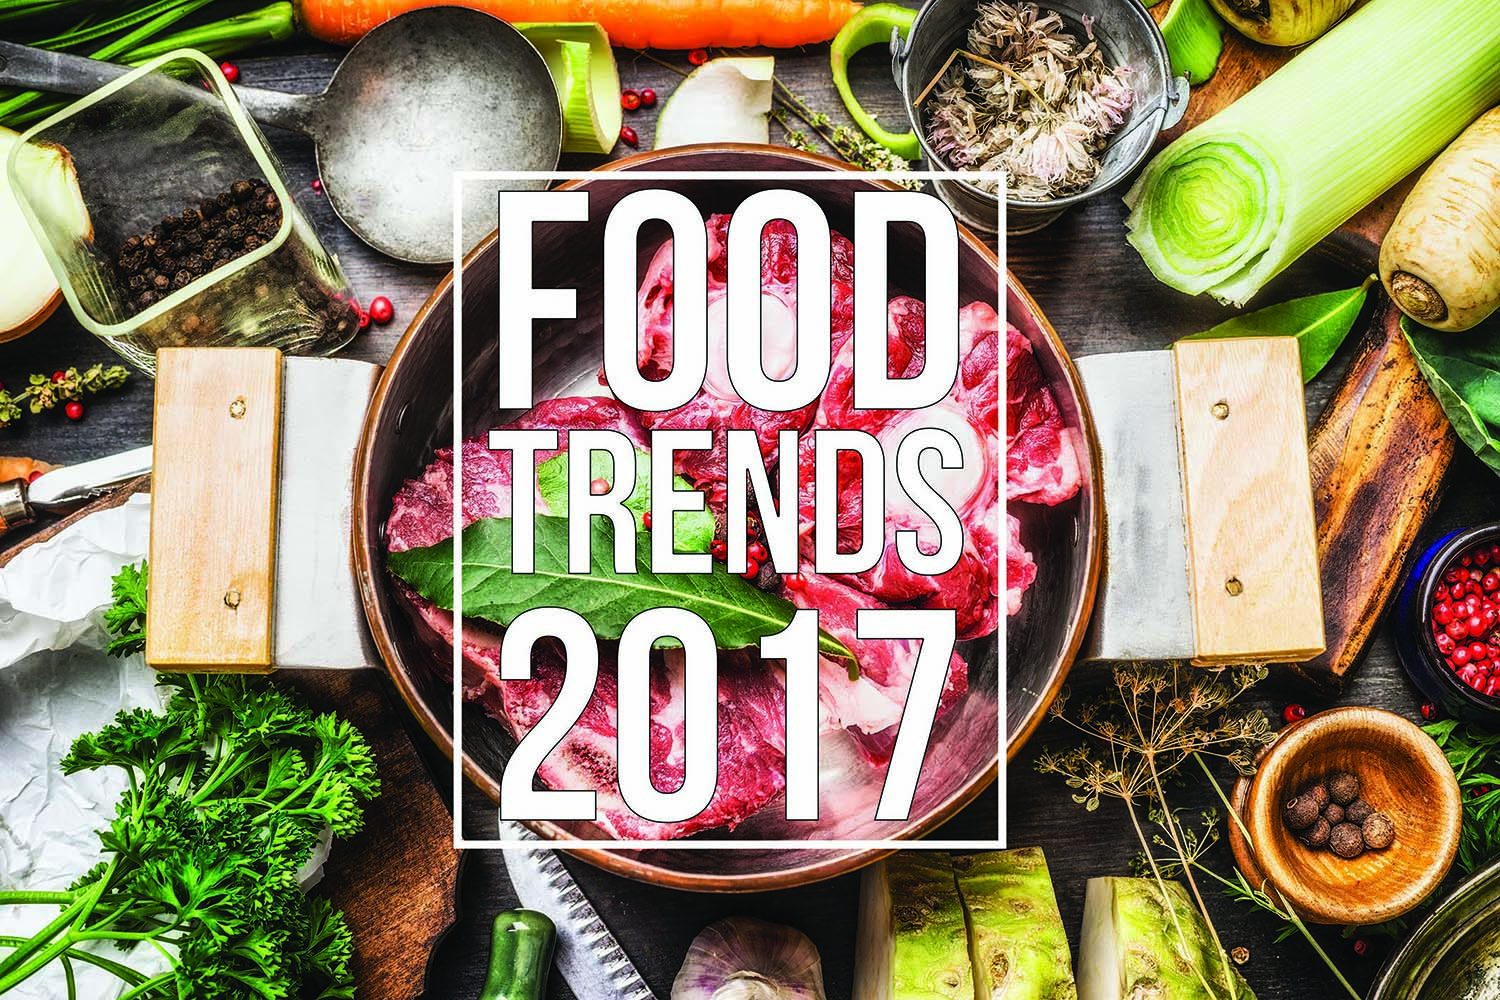 FAPC selects top 10 food trends for 2017